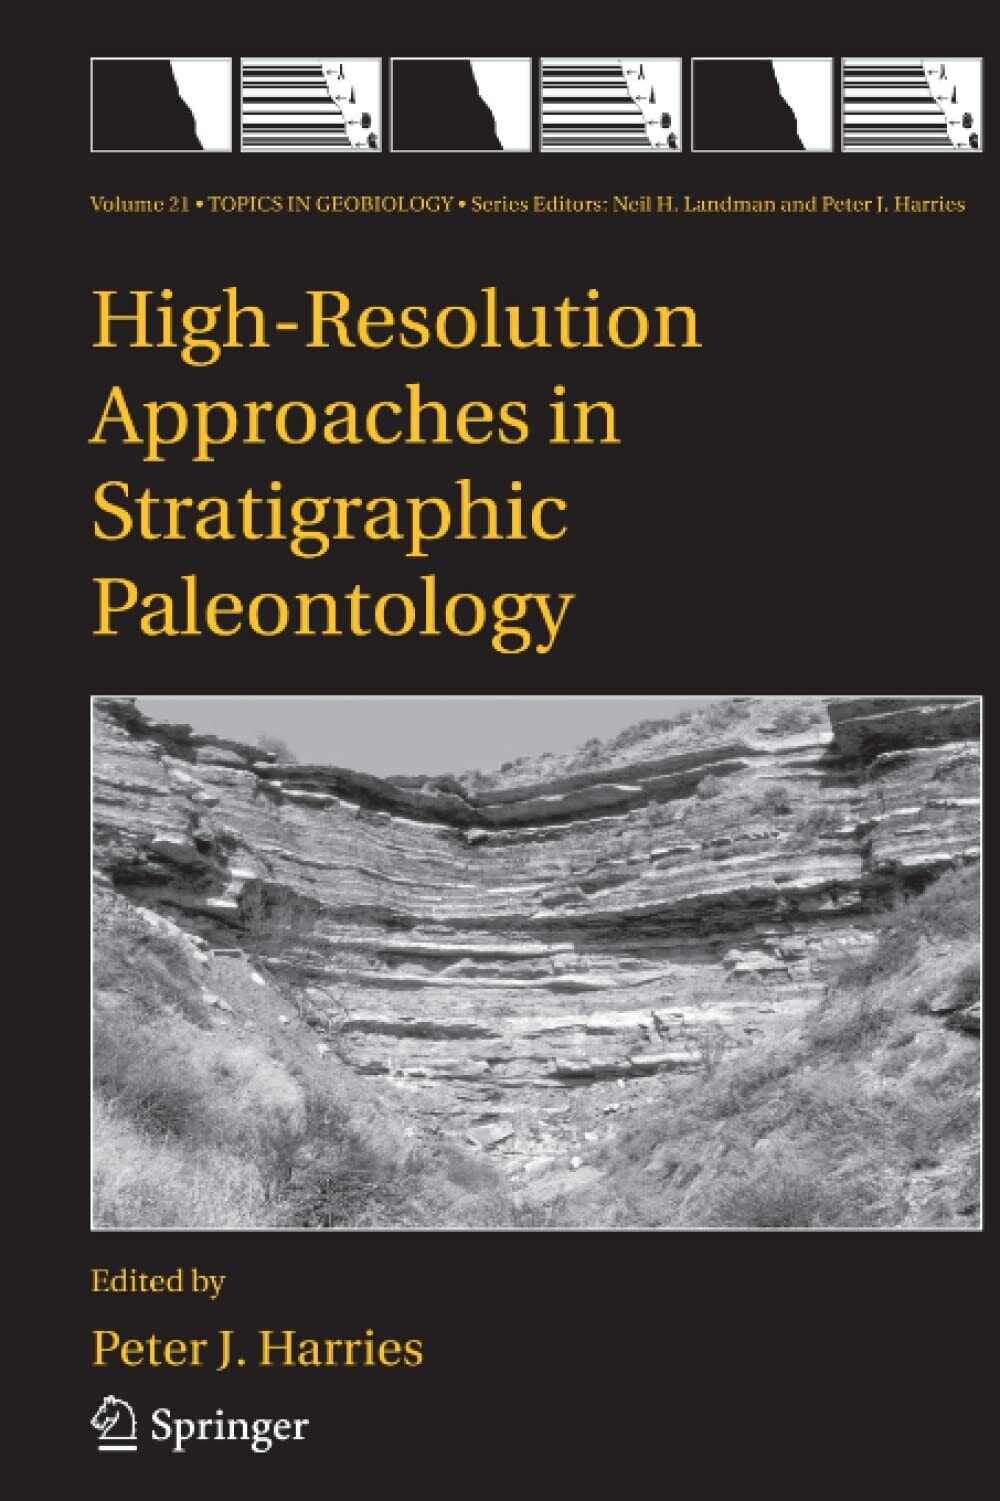 High-Resolution Approaches in Stratigraphic Paleontology - P.J. Harries - 2010